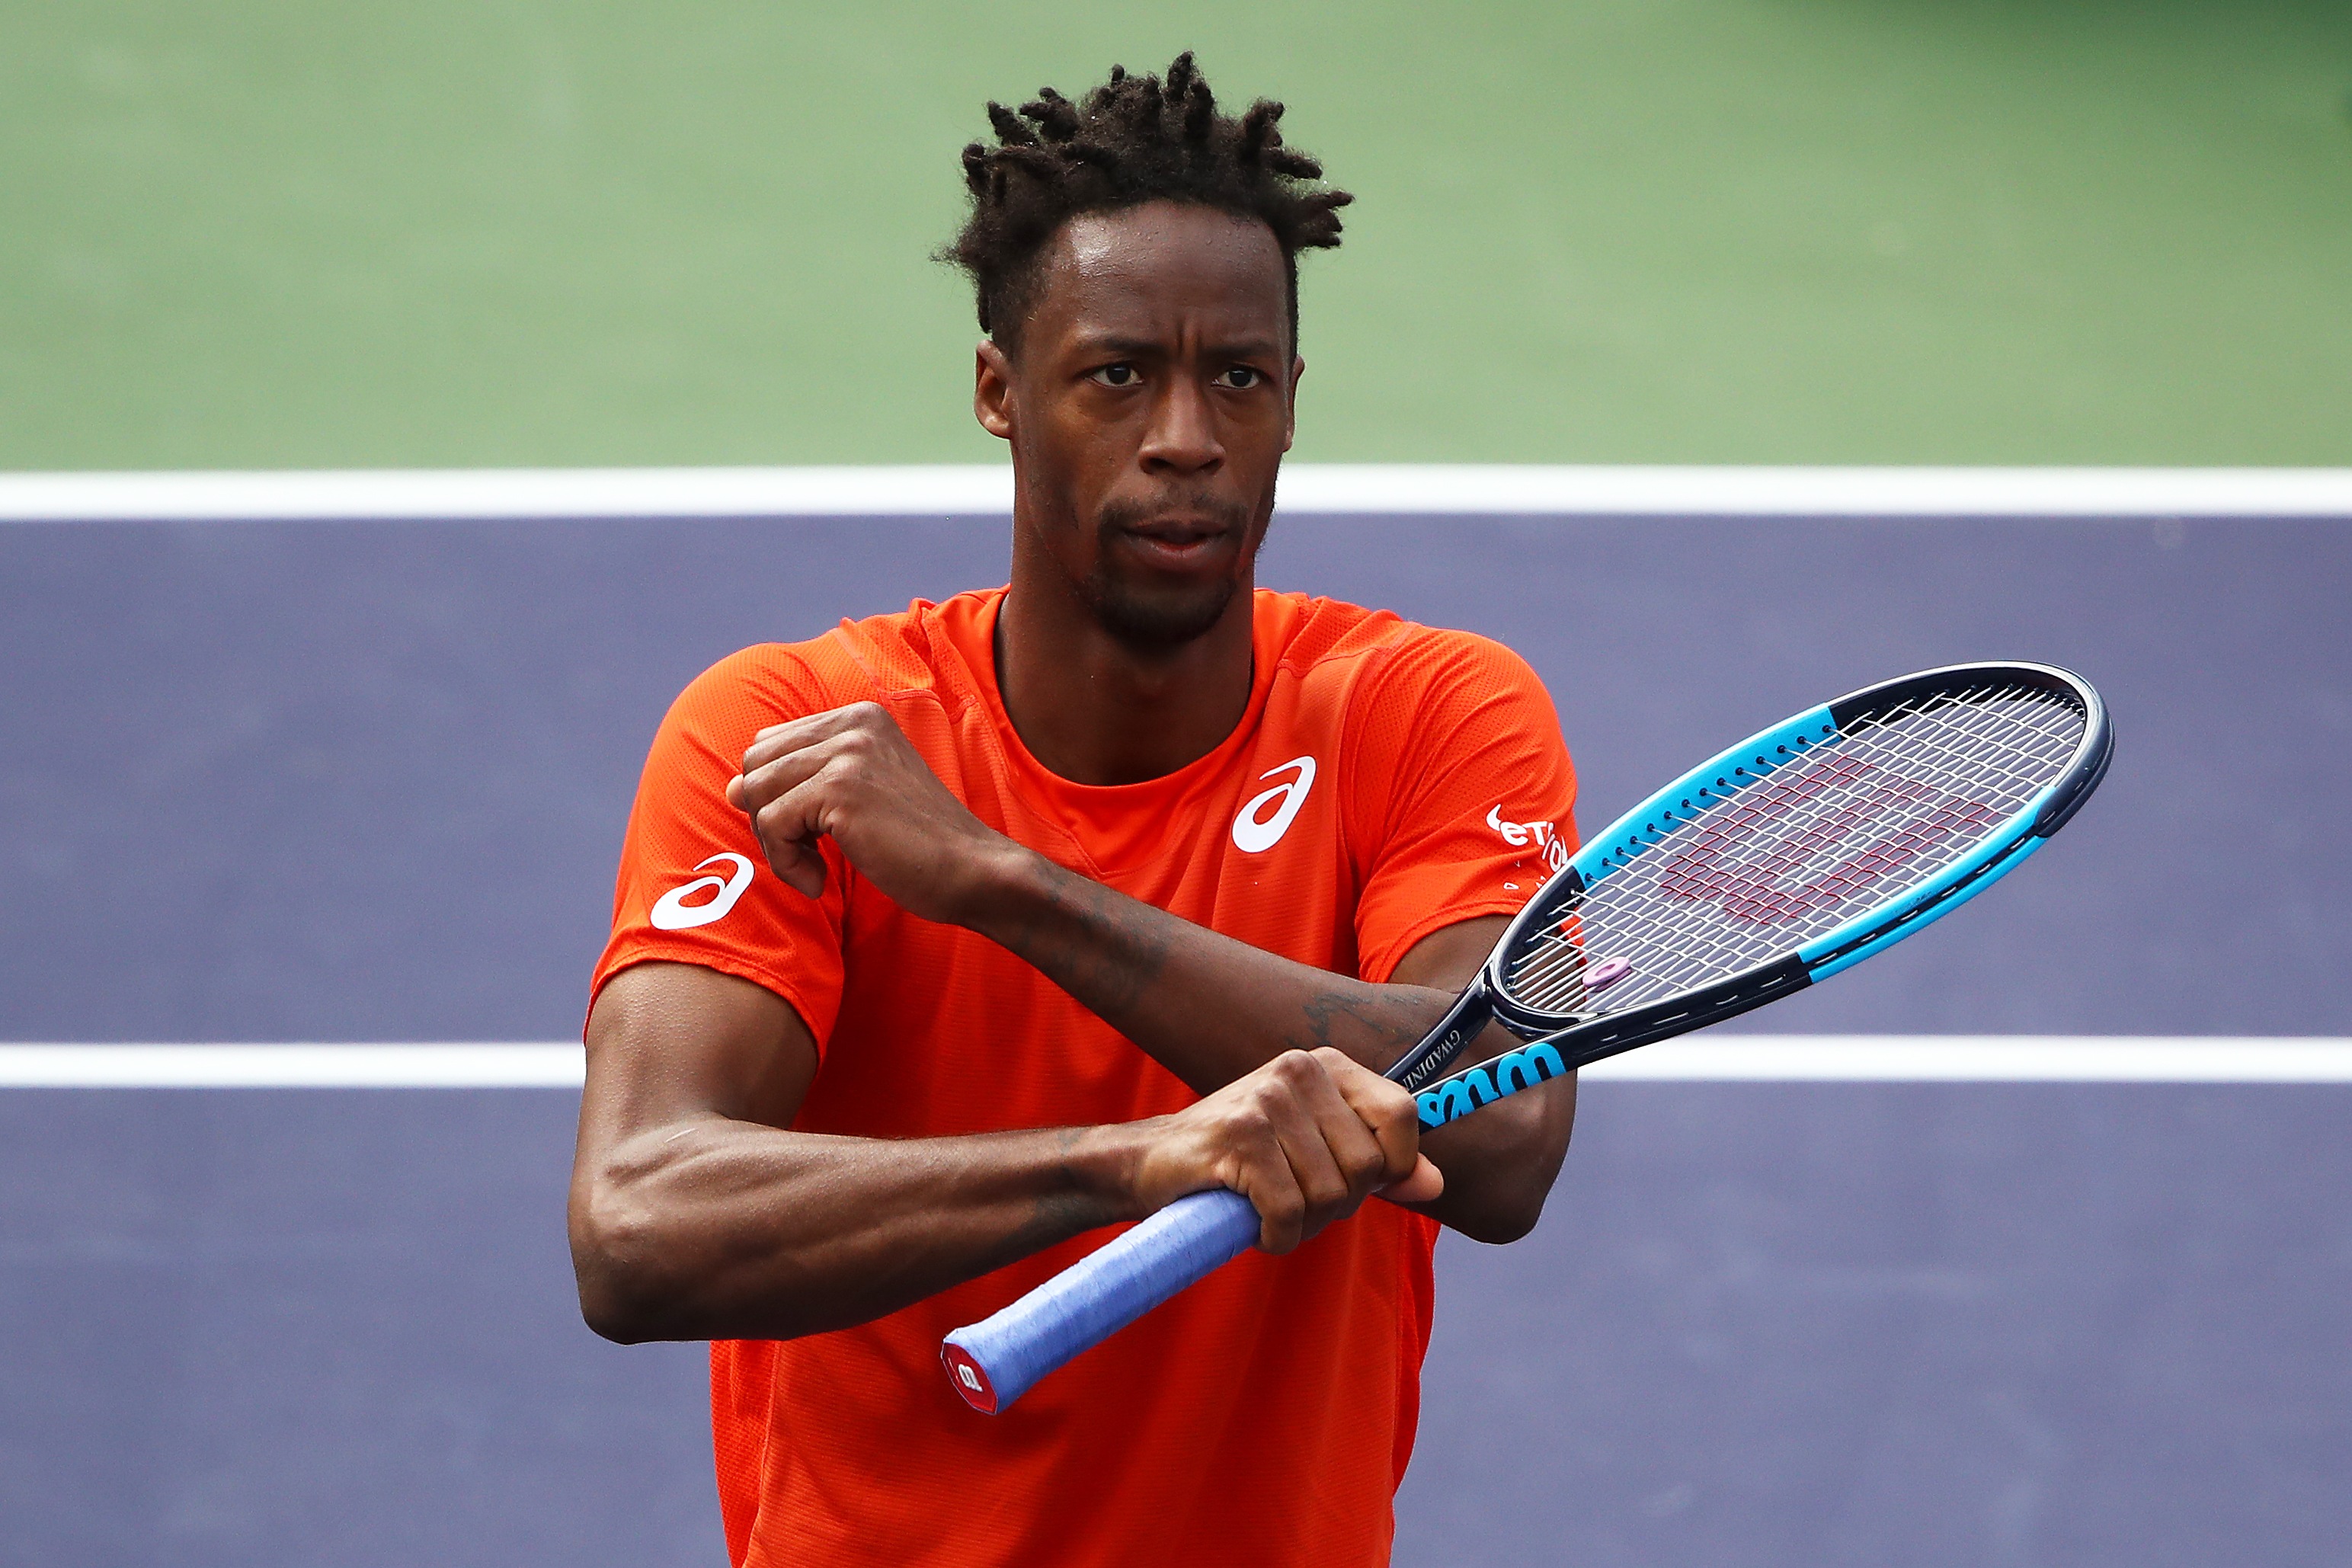 The New Monfils continues his rise with win over Mayer in Indian Wells